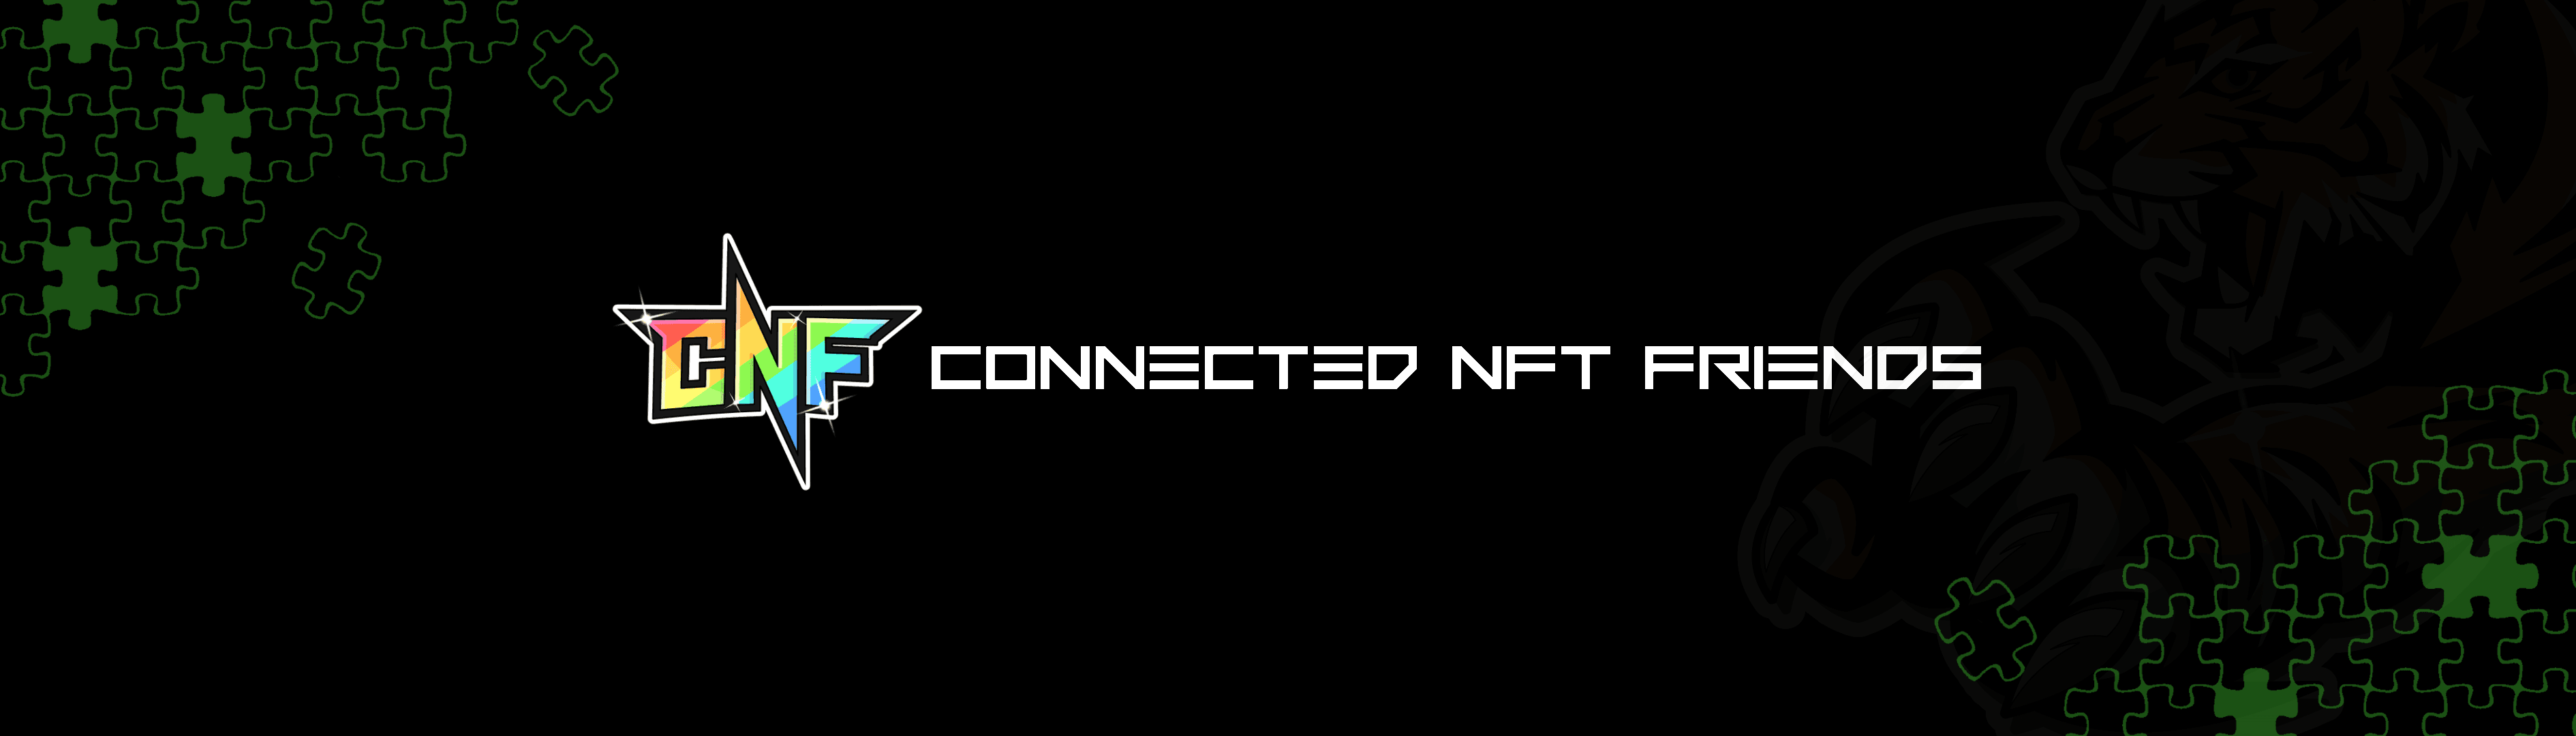 Connected_NFT_Friends 横幅